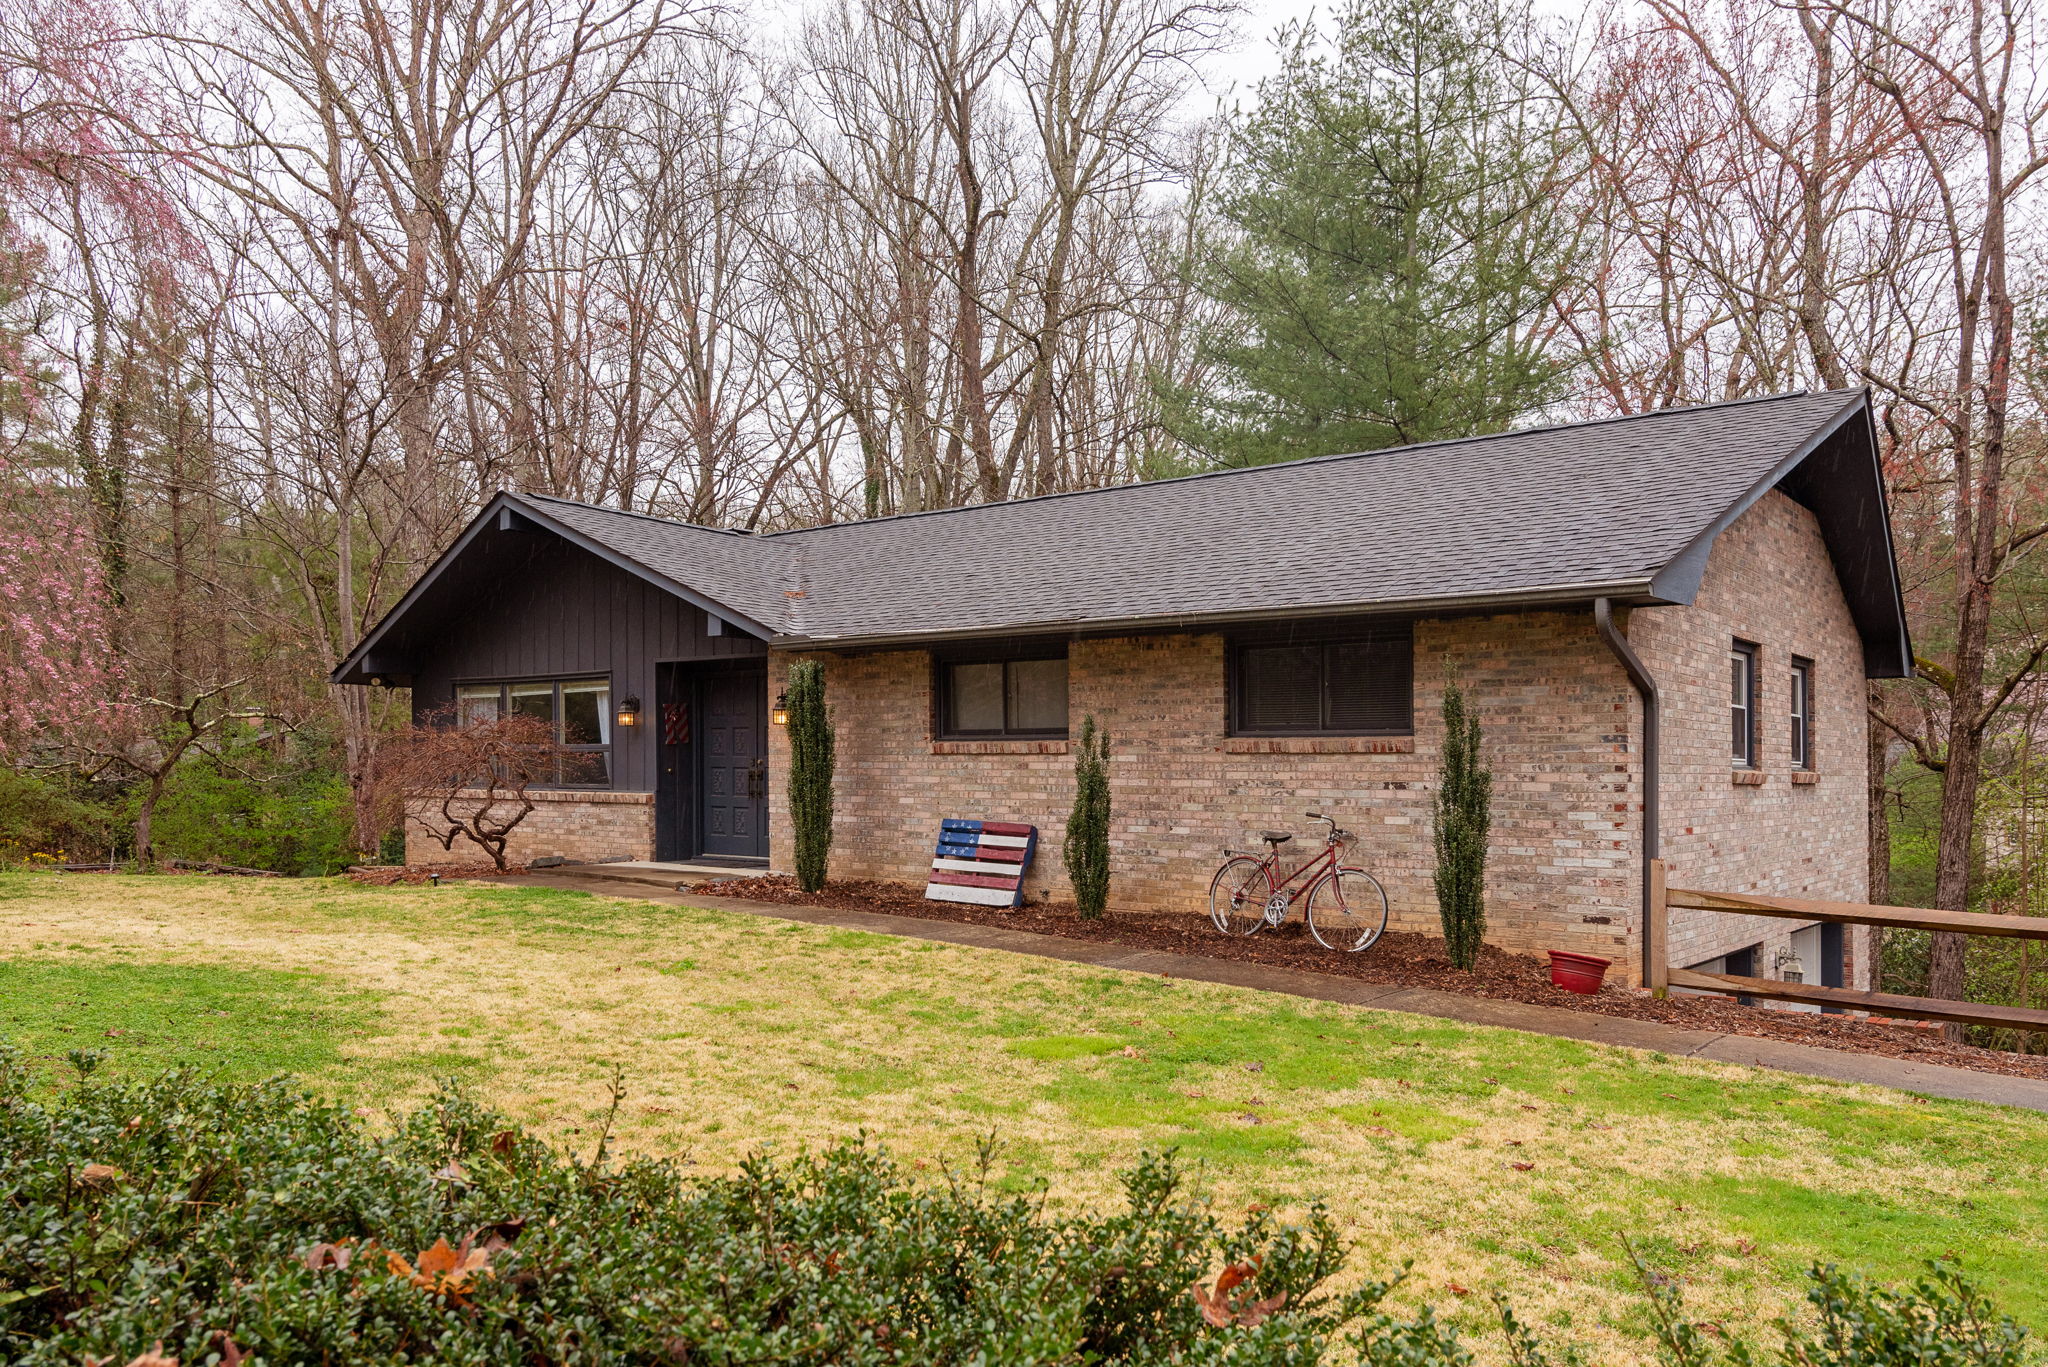  116 Brightwater Heights Dr, Hendersonville, NC 28791, US